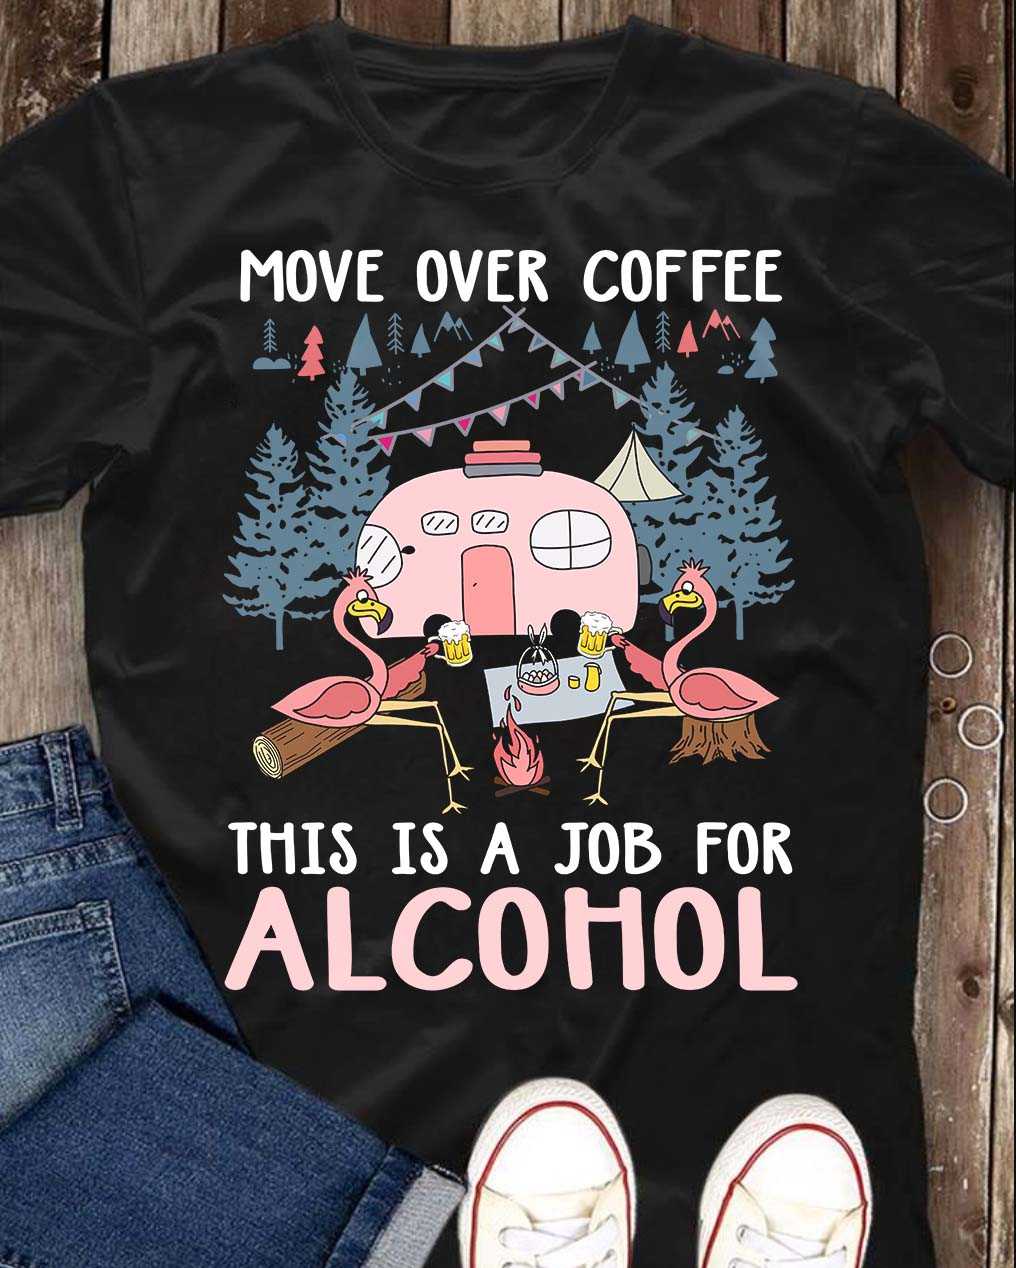 Move over coffee - This is a job for alcohol, drinking and camping, flamingo and beer